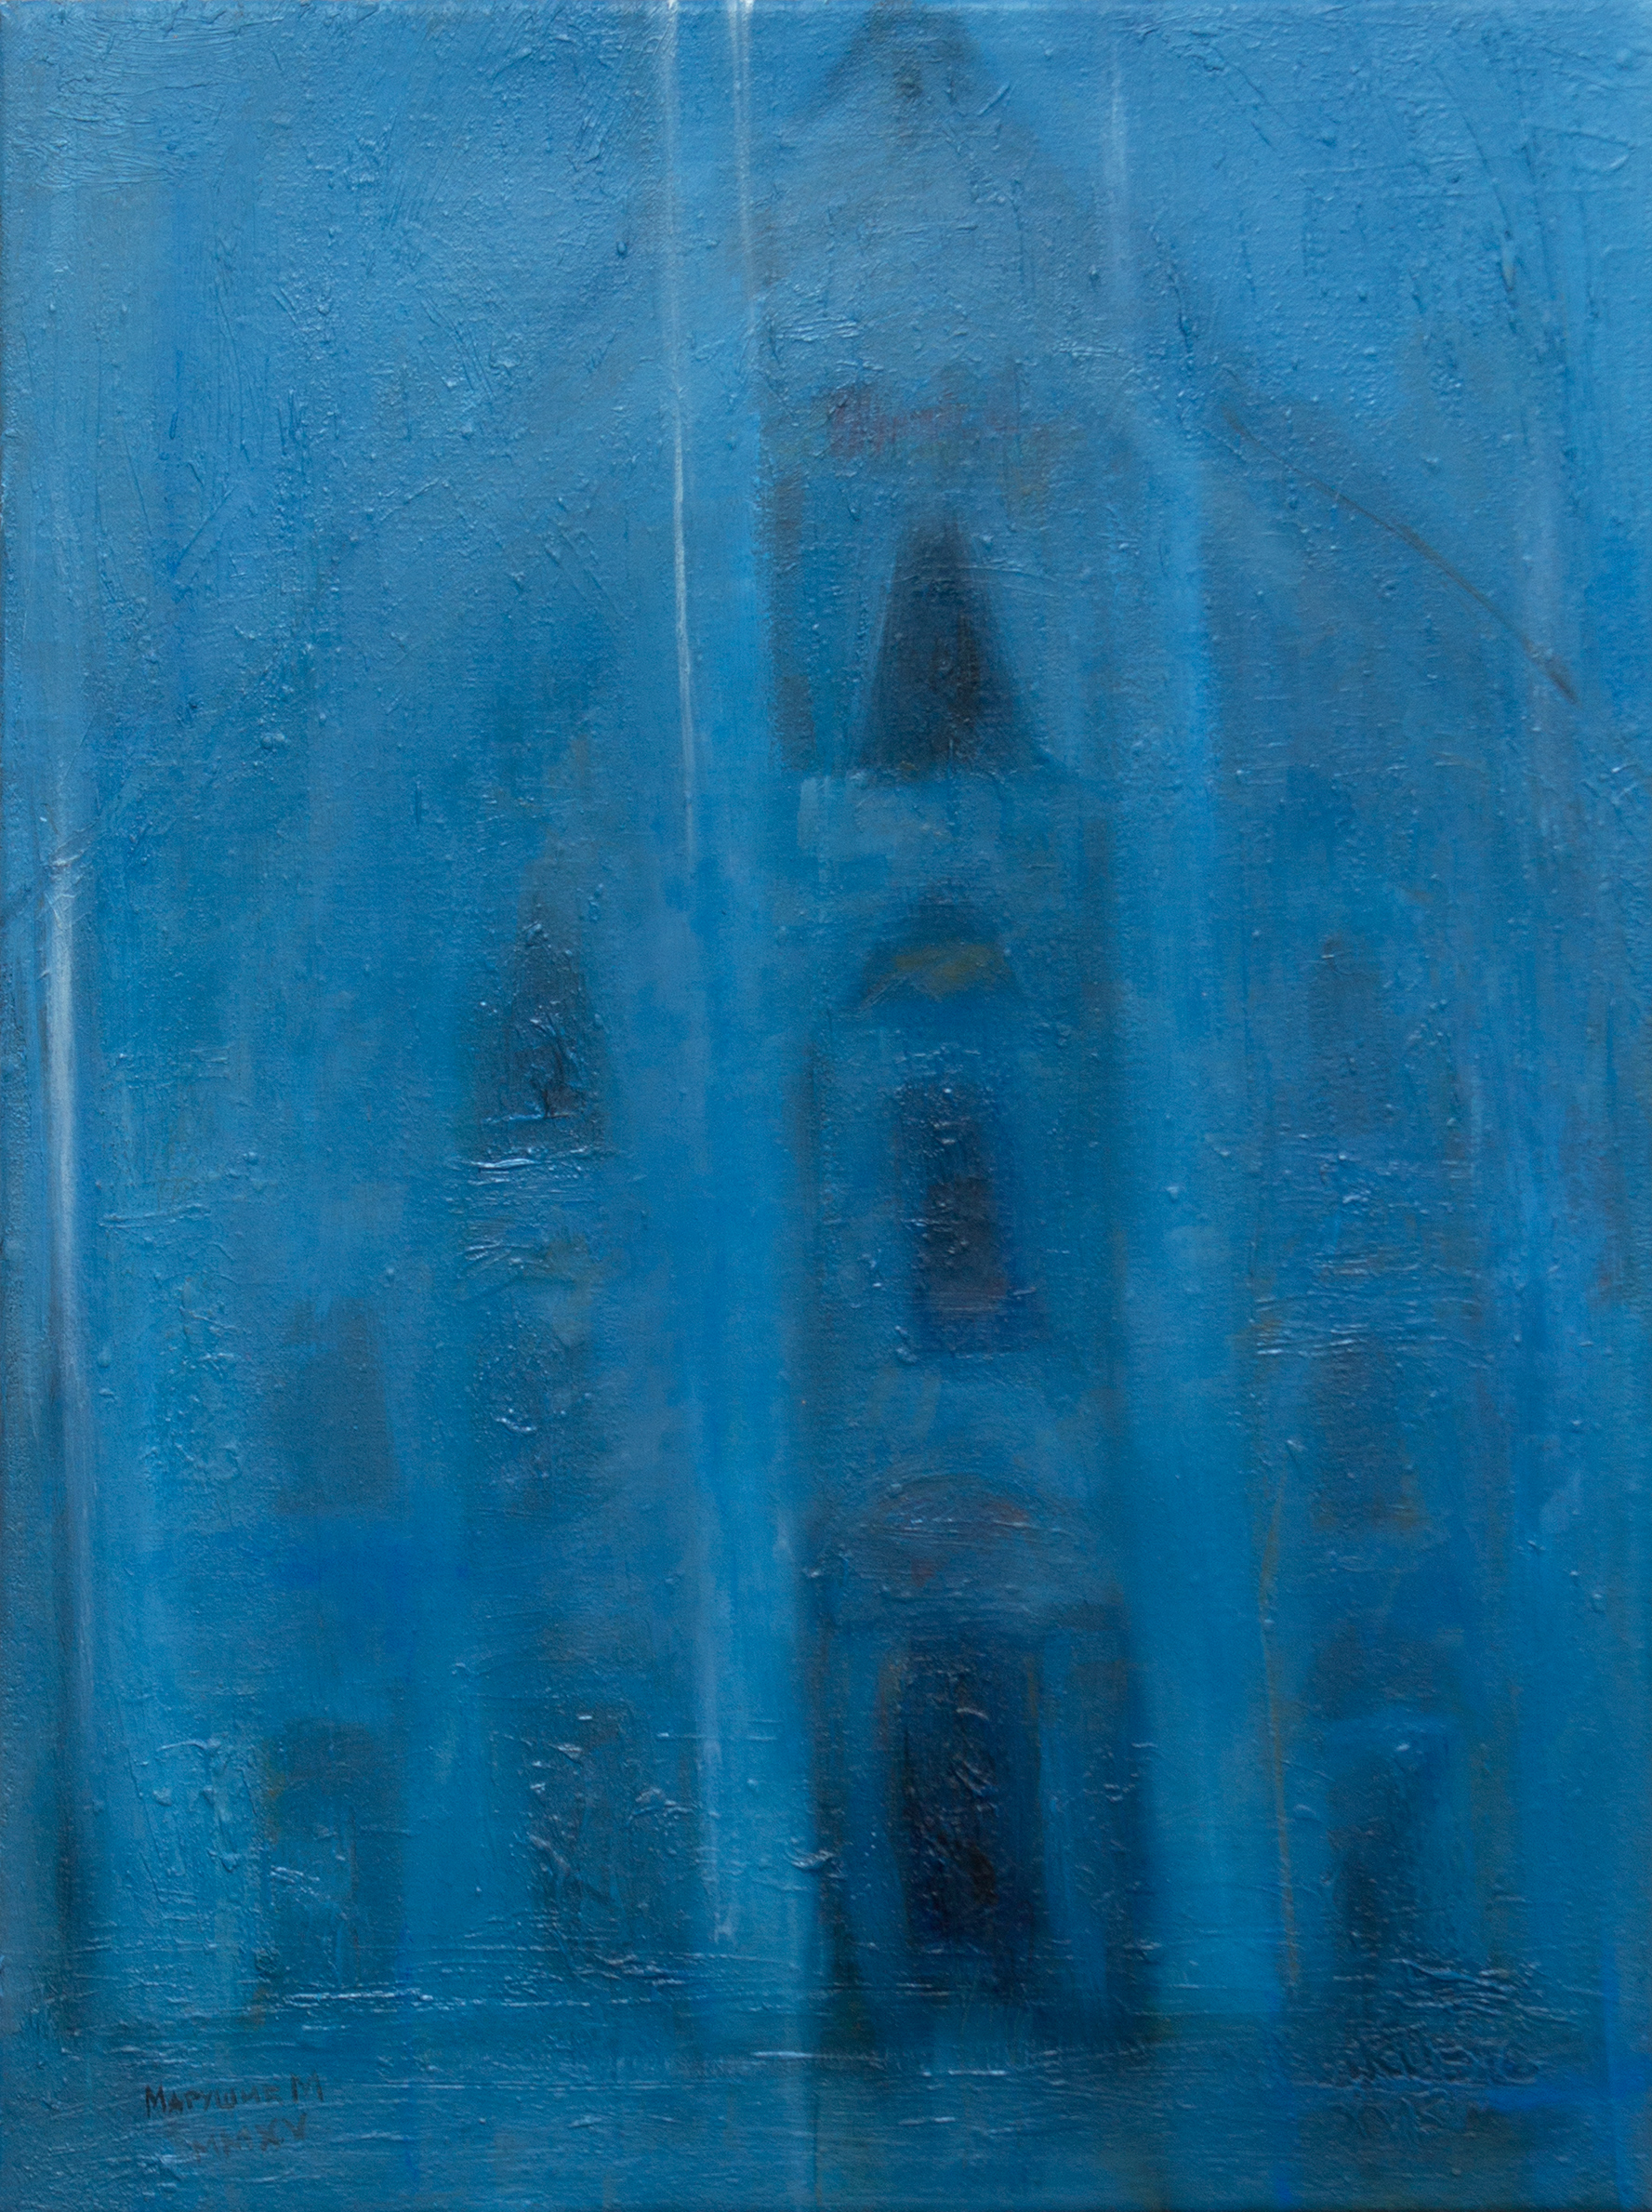 Blue Cathedral - Oil painting on canvas 30x40cm, year 2015 - by artist Milica MARUŠIĆ Art